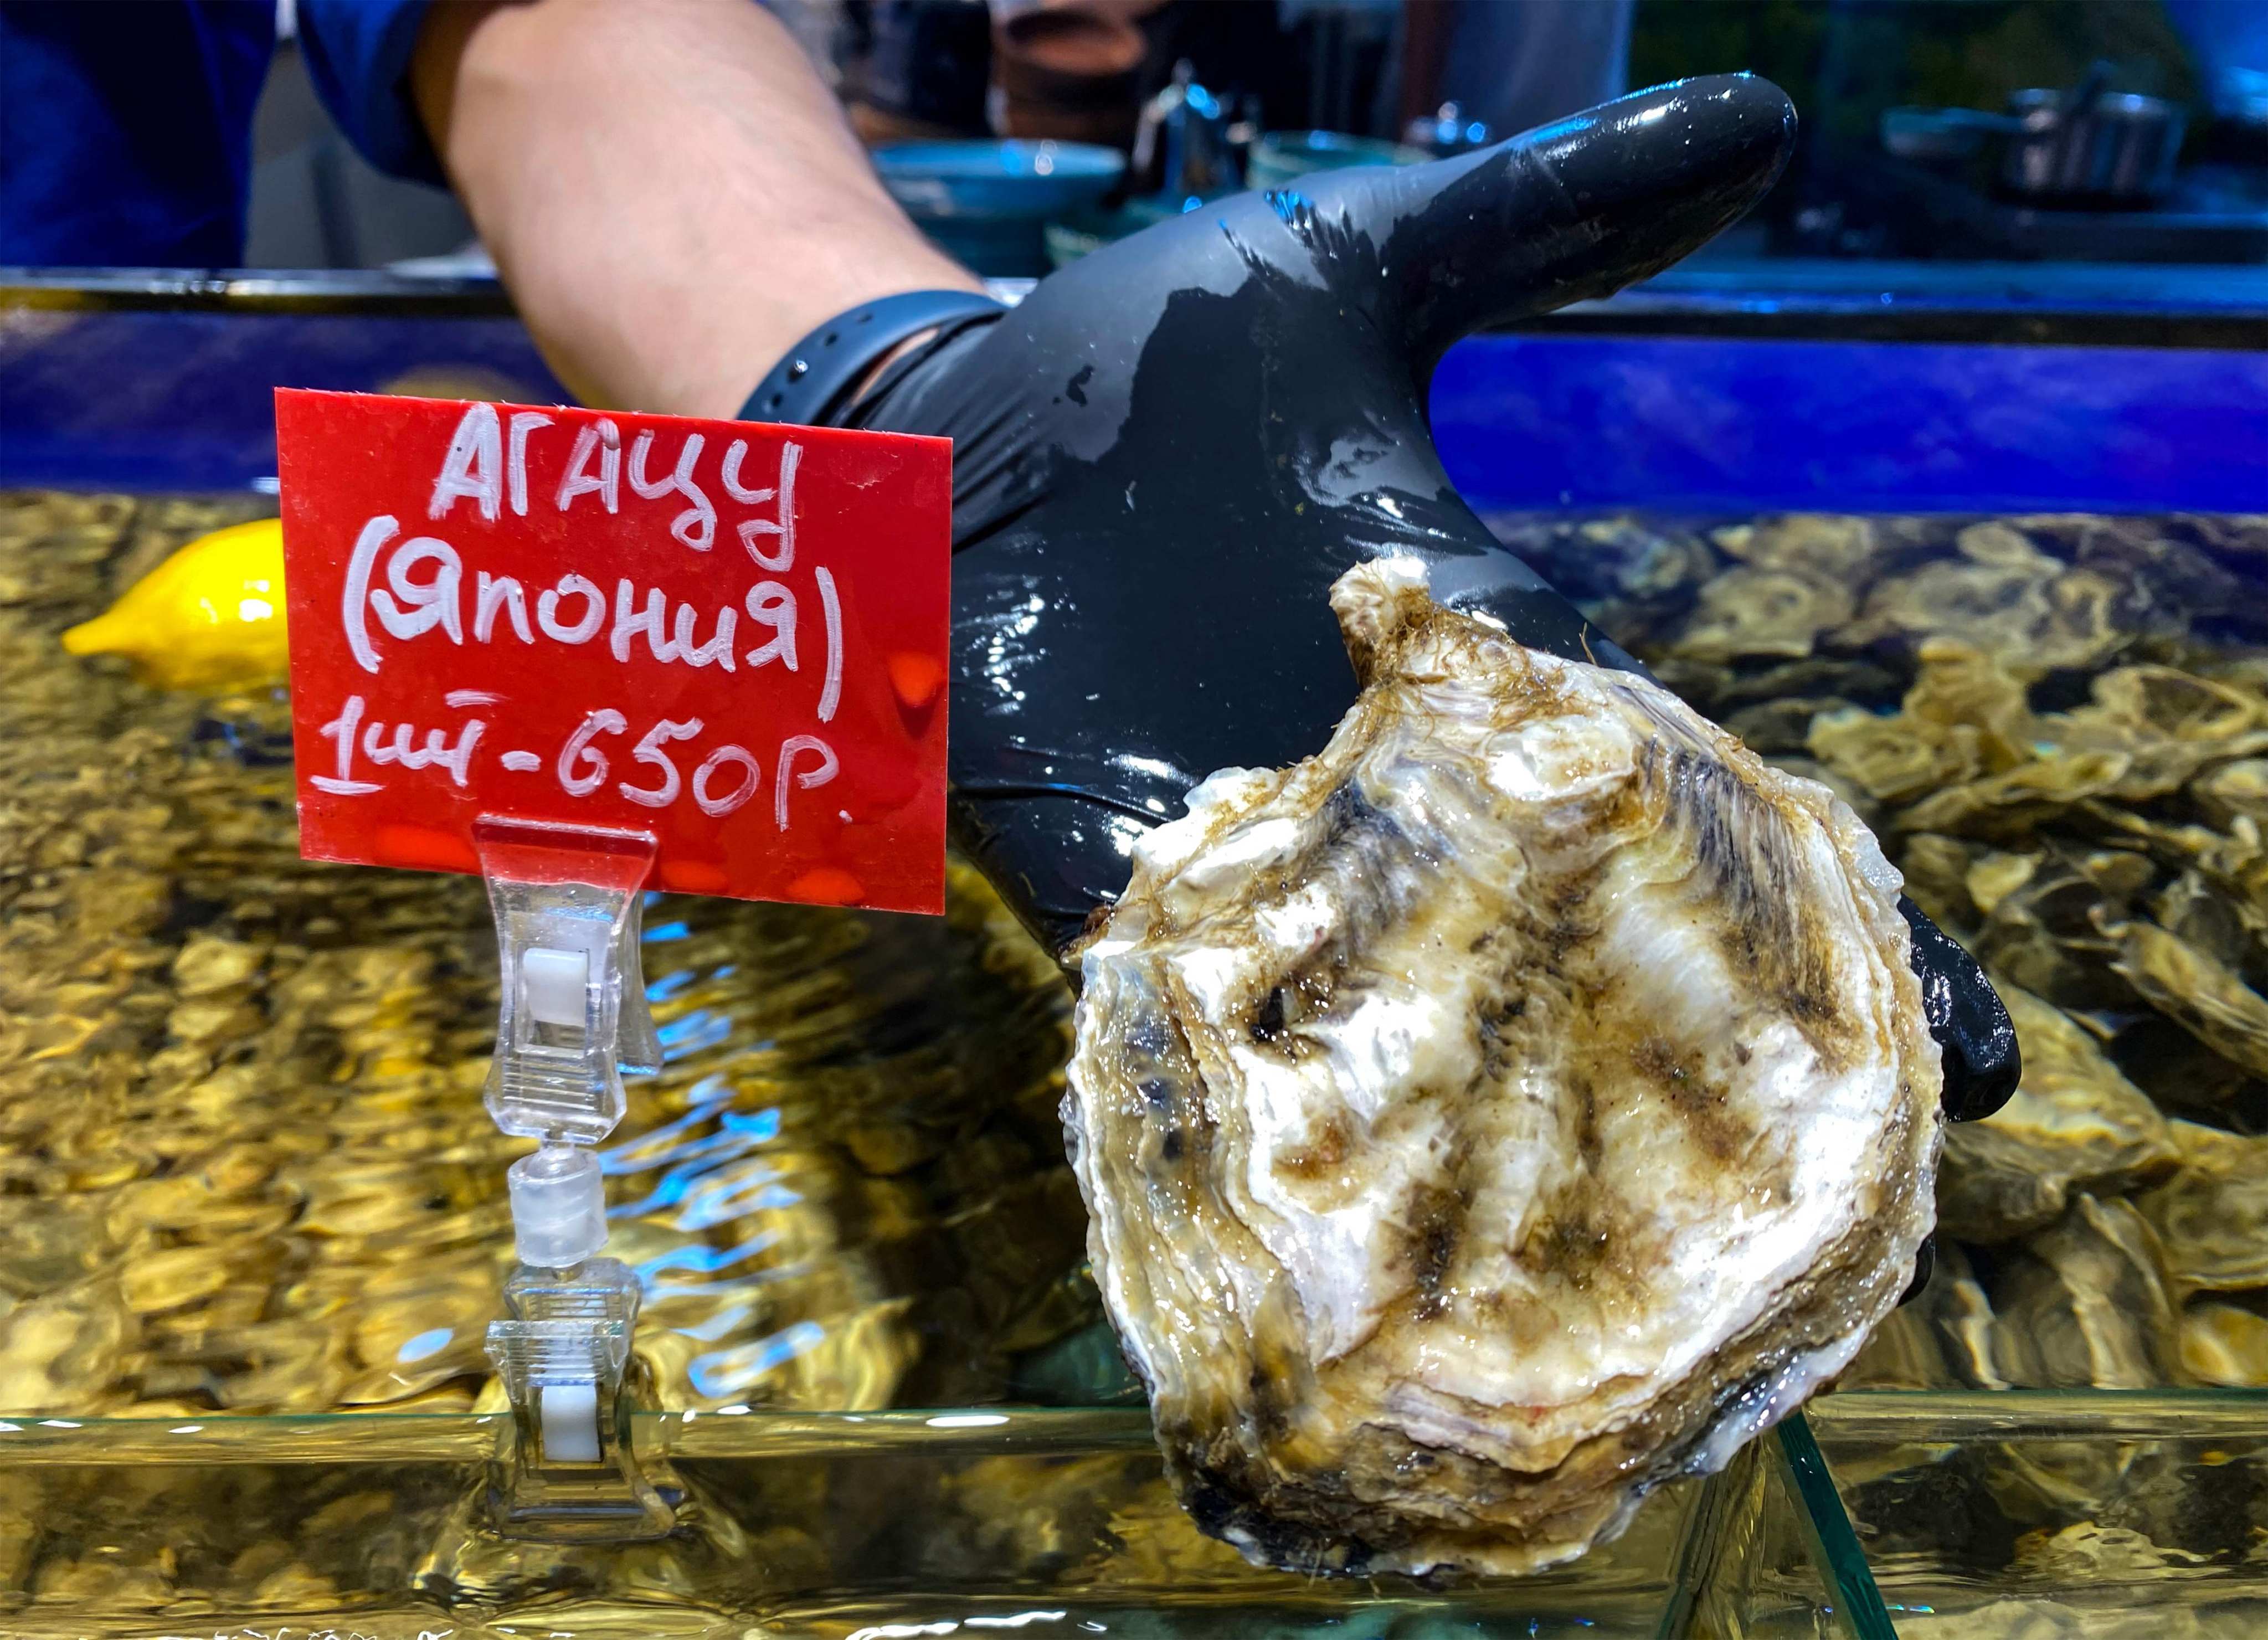 Oysters from Japan are seen for sale in Moscow on Monday. Photo: AFP